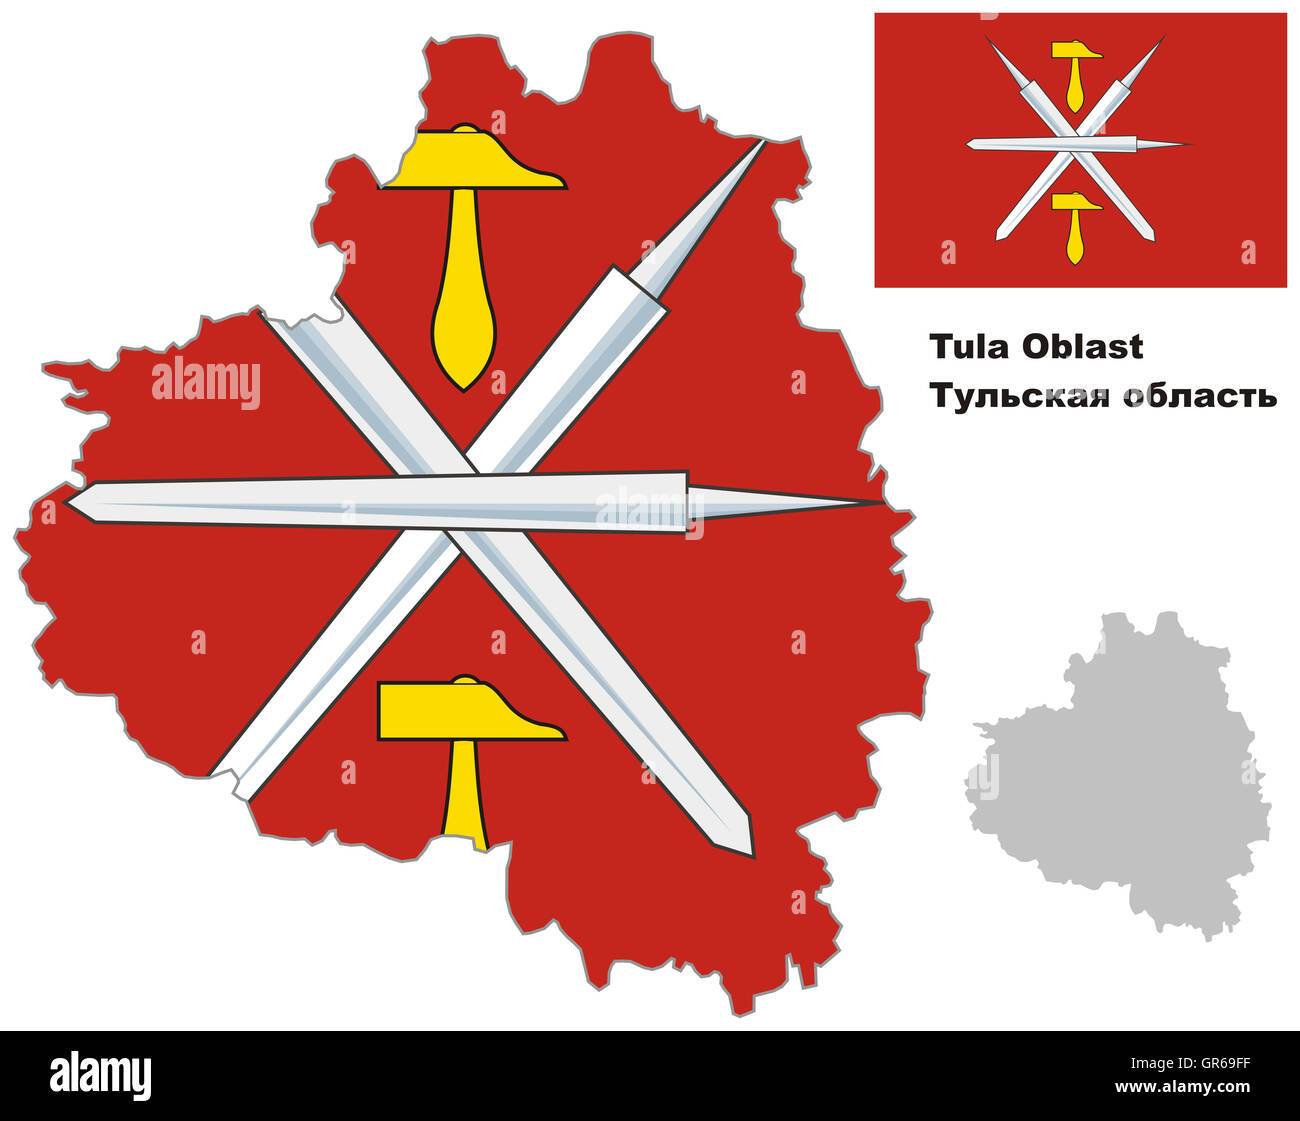 Outline map of Tula Oblast with flag. Regions of Russia. Vector illustration. Stock Photo